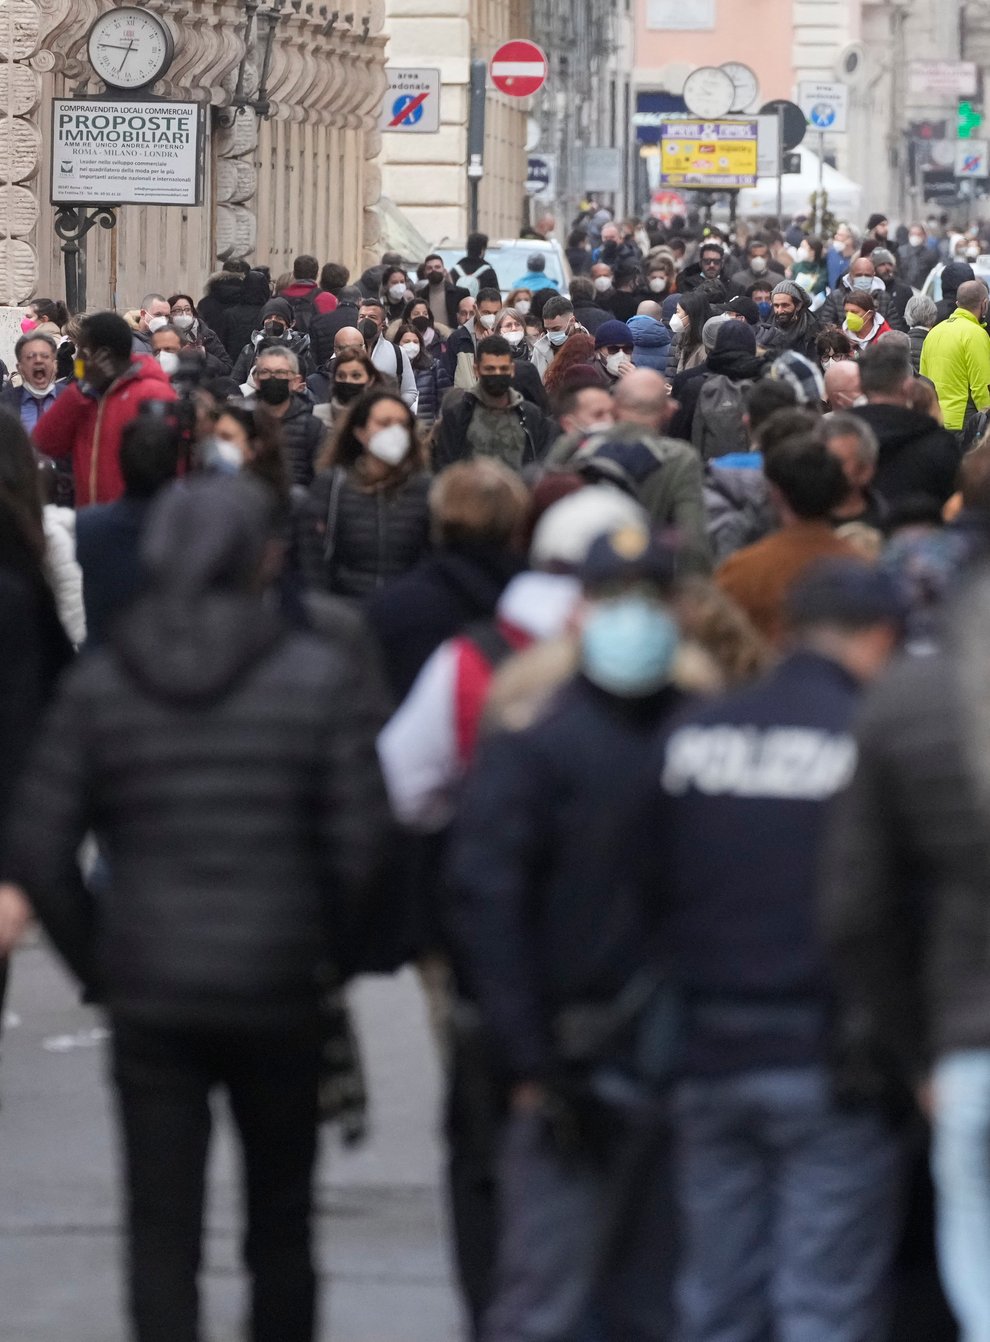 FILE – People stroll along the Via del Corso avenue in Rome, on Jan. 5, 2022. New coronavirus restrictions have gone into effect in Italy that amounted to a near-lockdown for the unvaccinated. As of Monday, proof of vaccination or a recent infection is required to access public transport, coffee shops and a host of other activities.The new “super” health pass requirement, which eliminates the ability to access services with just a negative test, coincided with the return to work and school for many Italians after the Christmas and New Year holiday. (AP Photo/Gregorio Borgia)